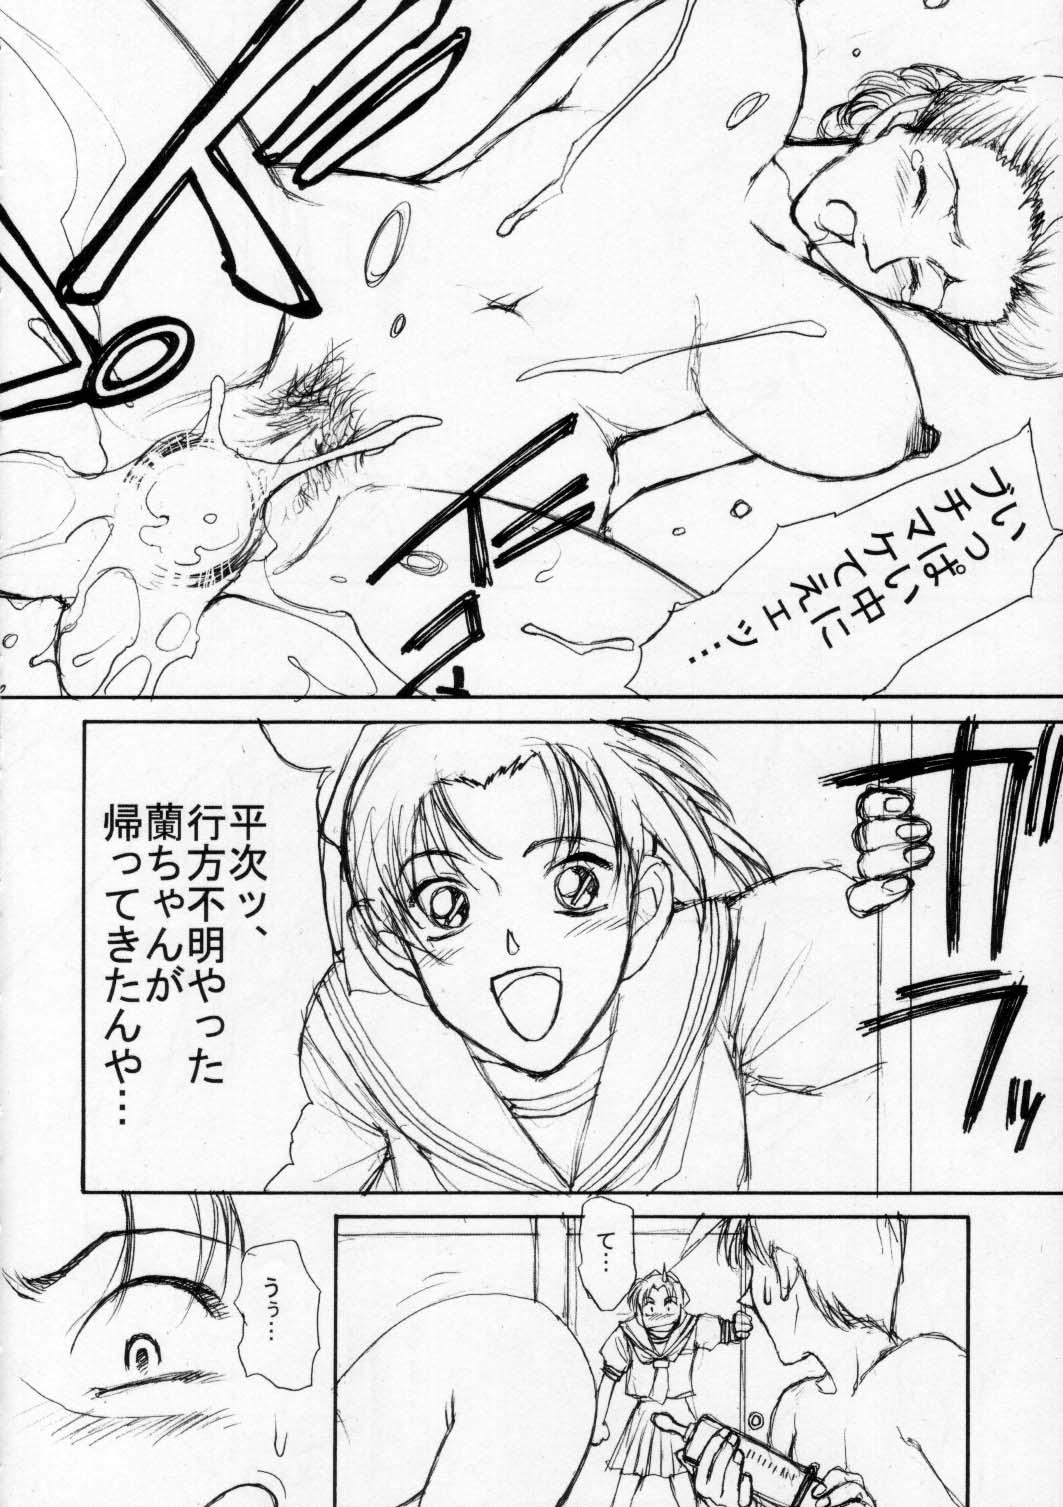 Sex Pussy Potemayo vol. 2 - Detective conan Full Movie - Page 11